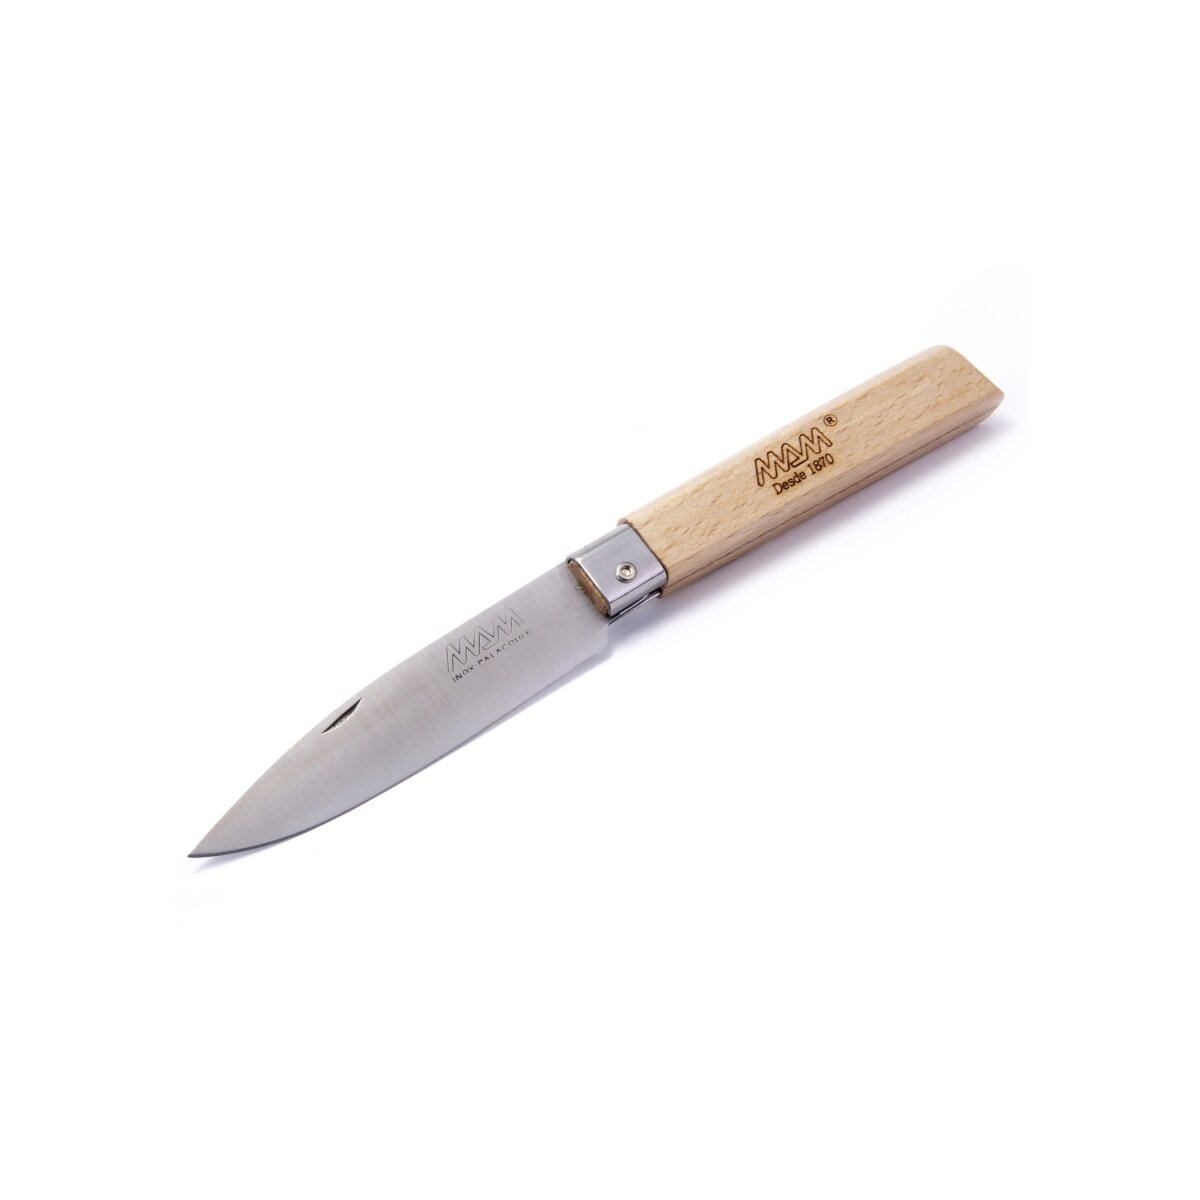 Pocket knife with drop point blade